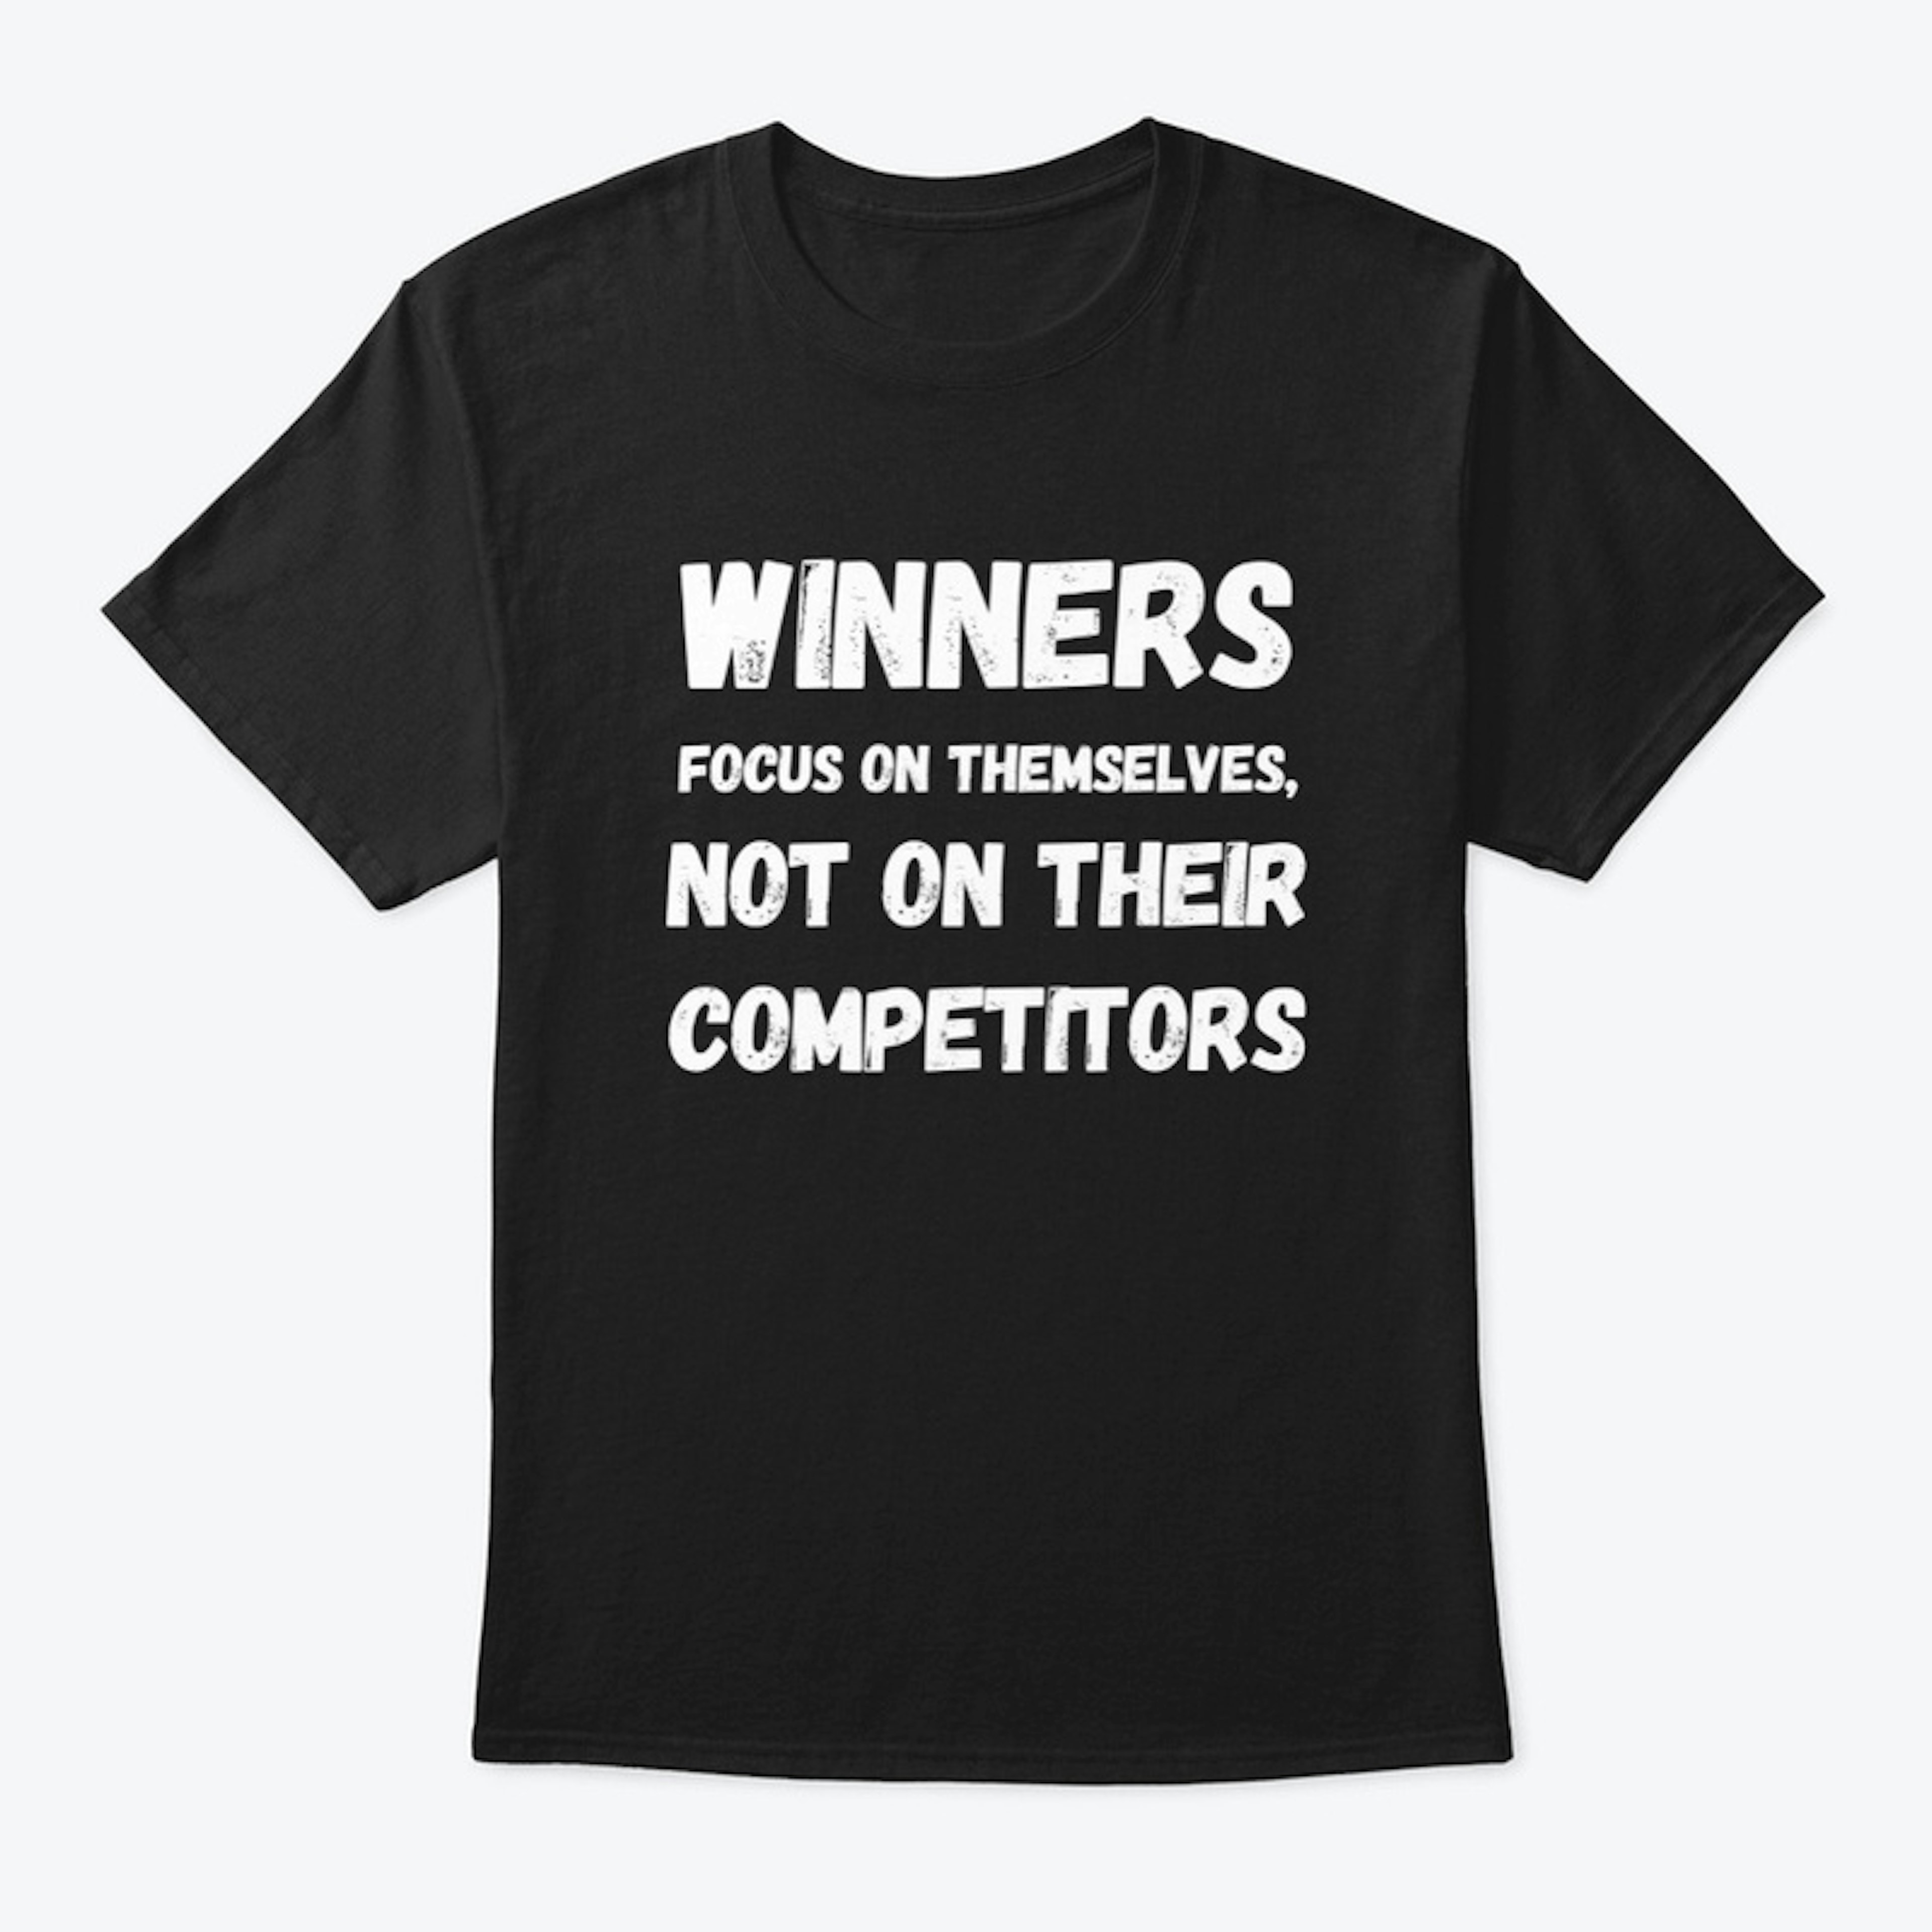 Winners focus on themselves T shirt